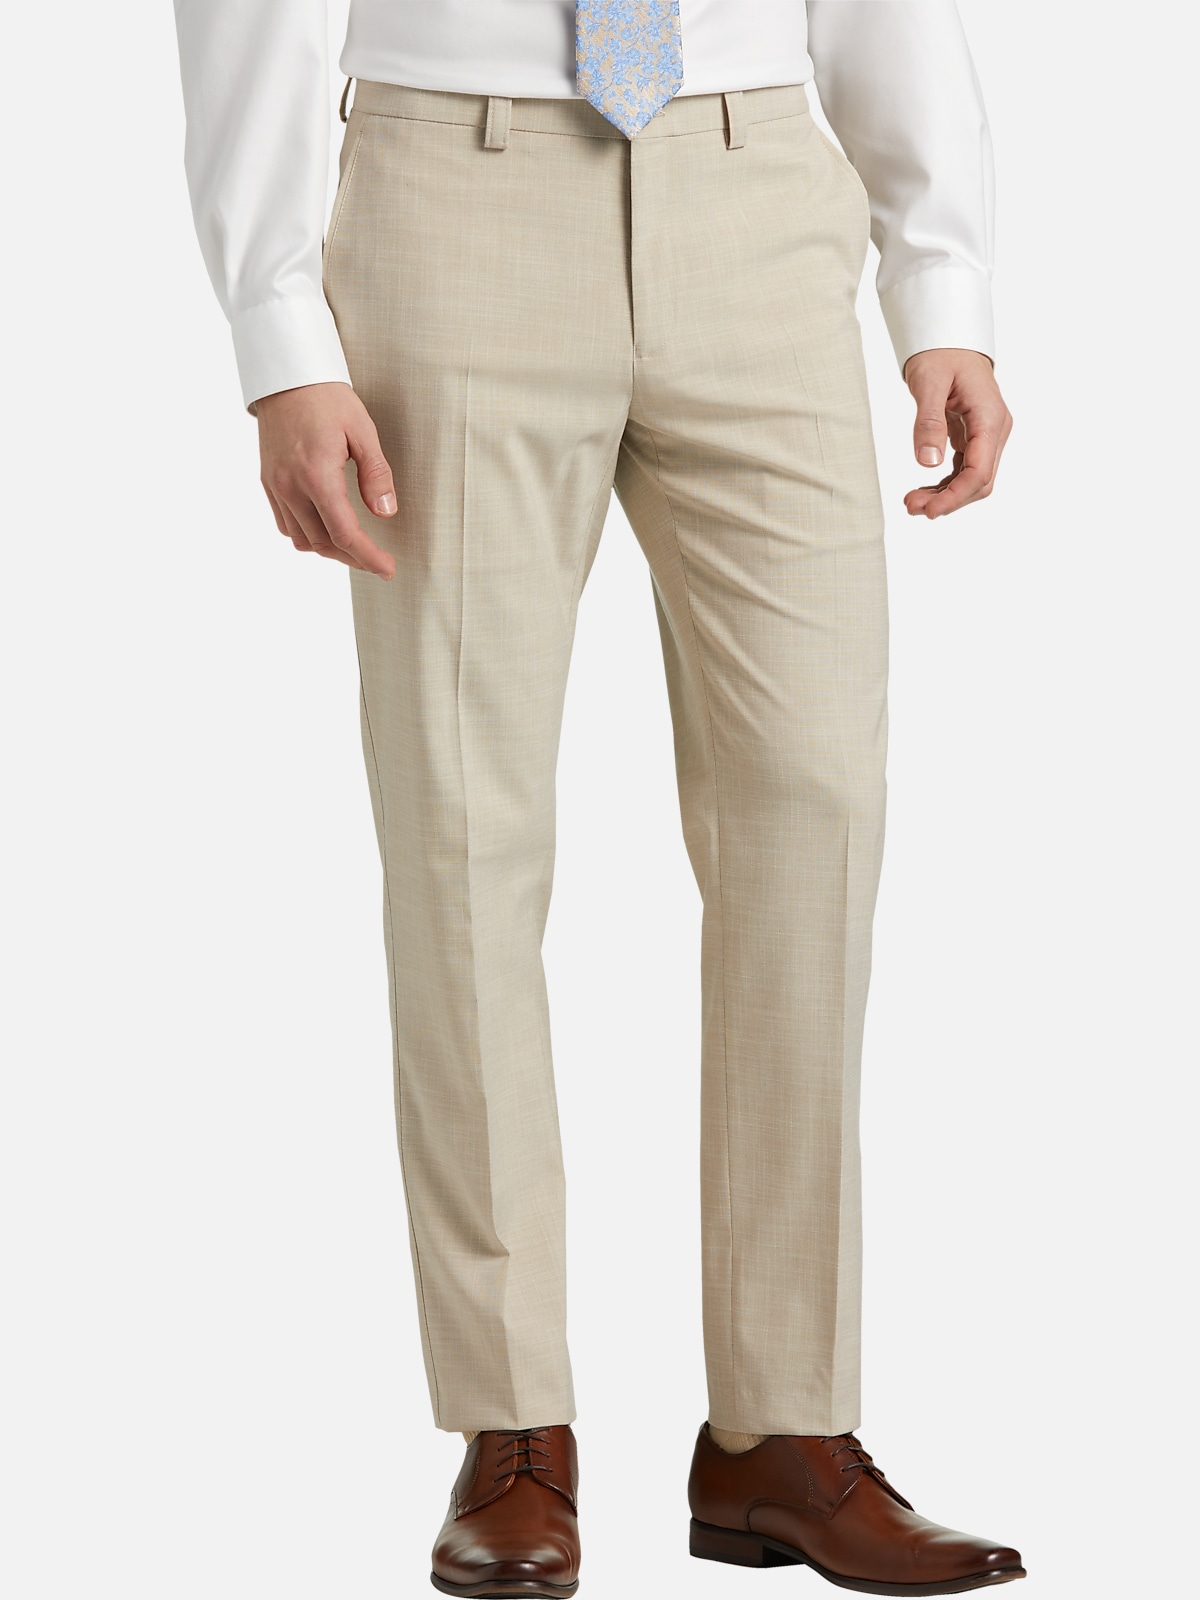 https://image.menswearhouse.com/is/image/TMW/TMW_3XCX_05_MICHAEL_KORS_SUIT_SEPARATE_PANTS_TAN_SOLID_MAIN?imPolicy=pdp-zoom-mob